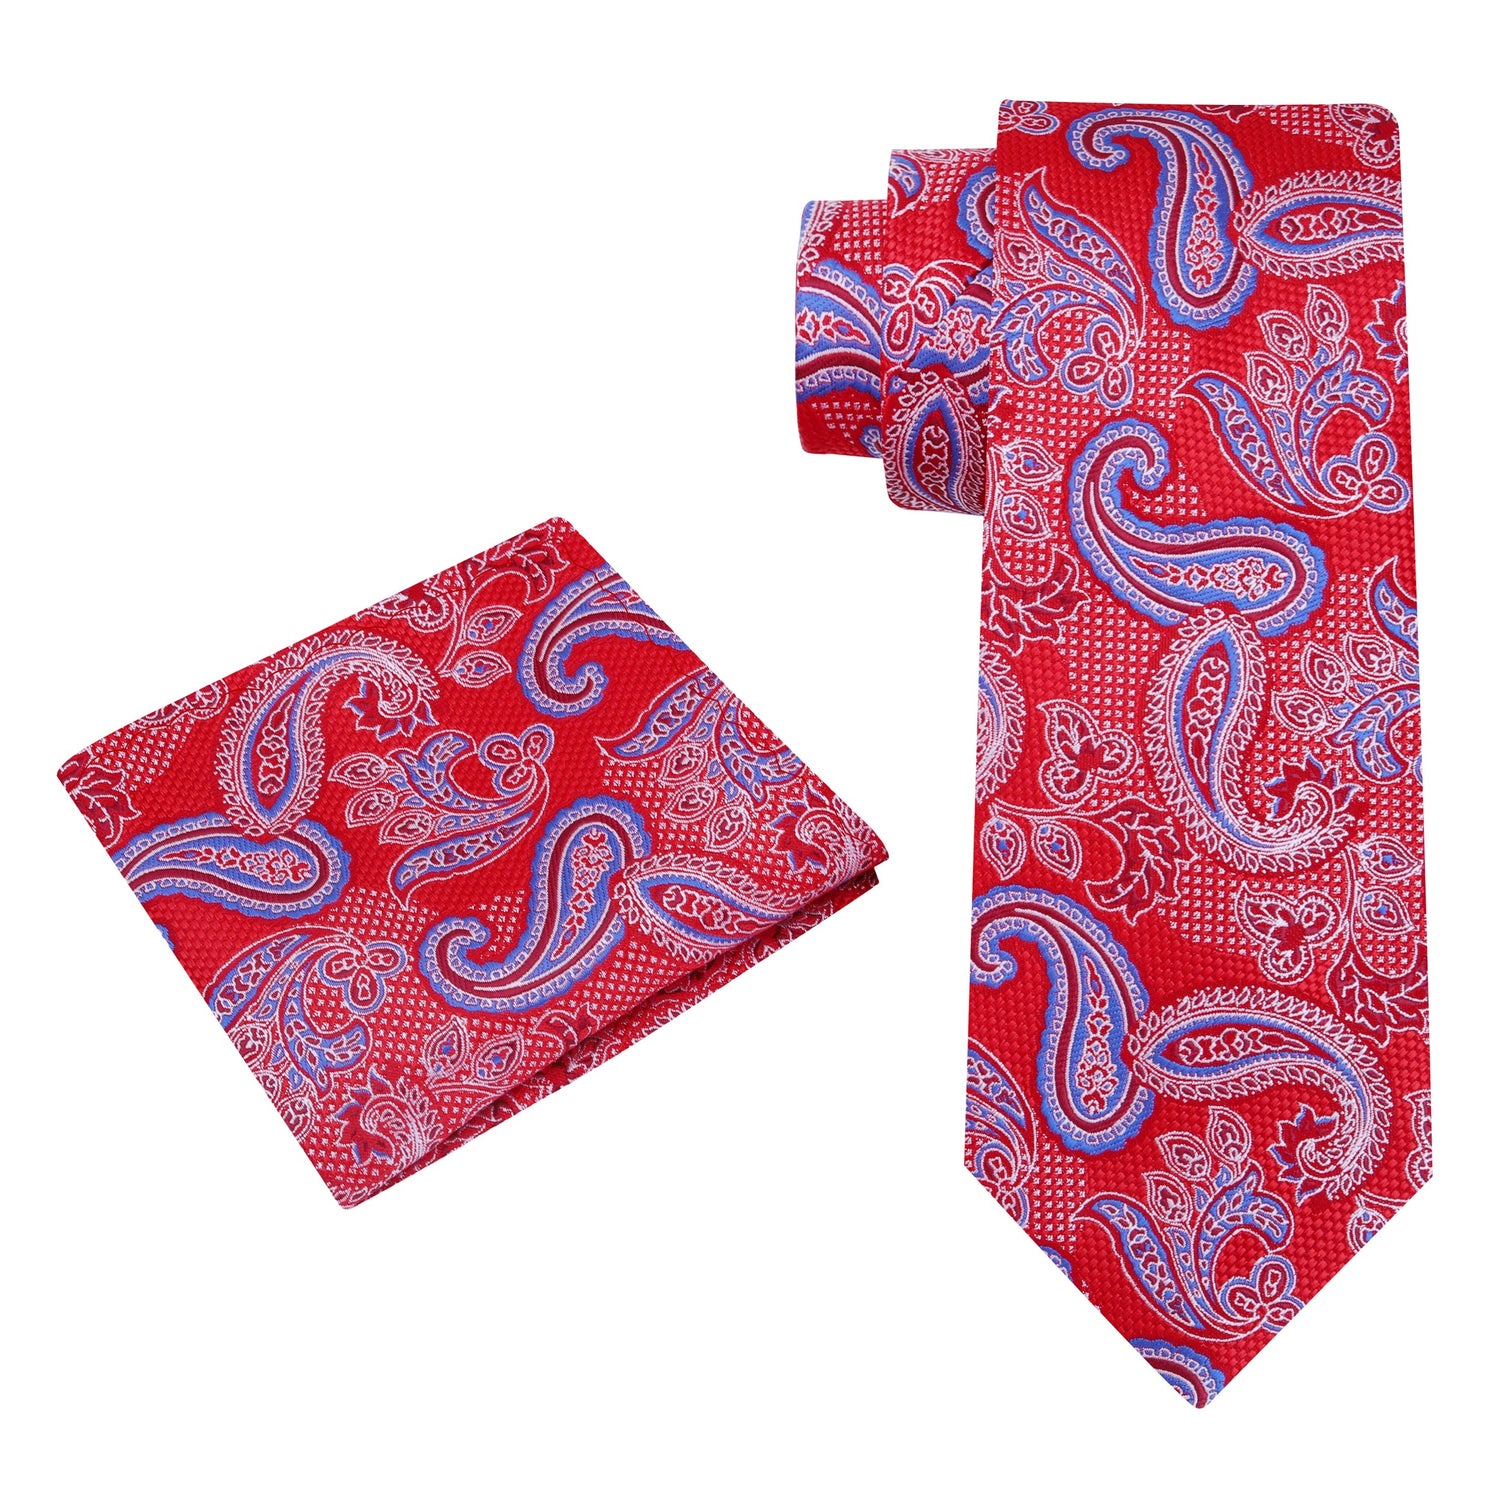 View 2: A Red, Blue Paisley Pattern Silk Necktie, Matching Pocket Square 